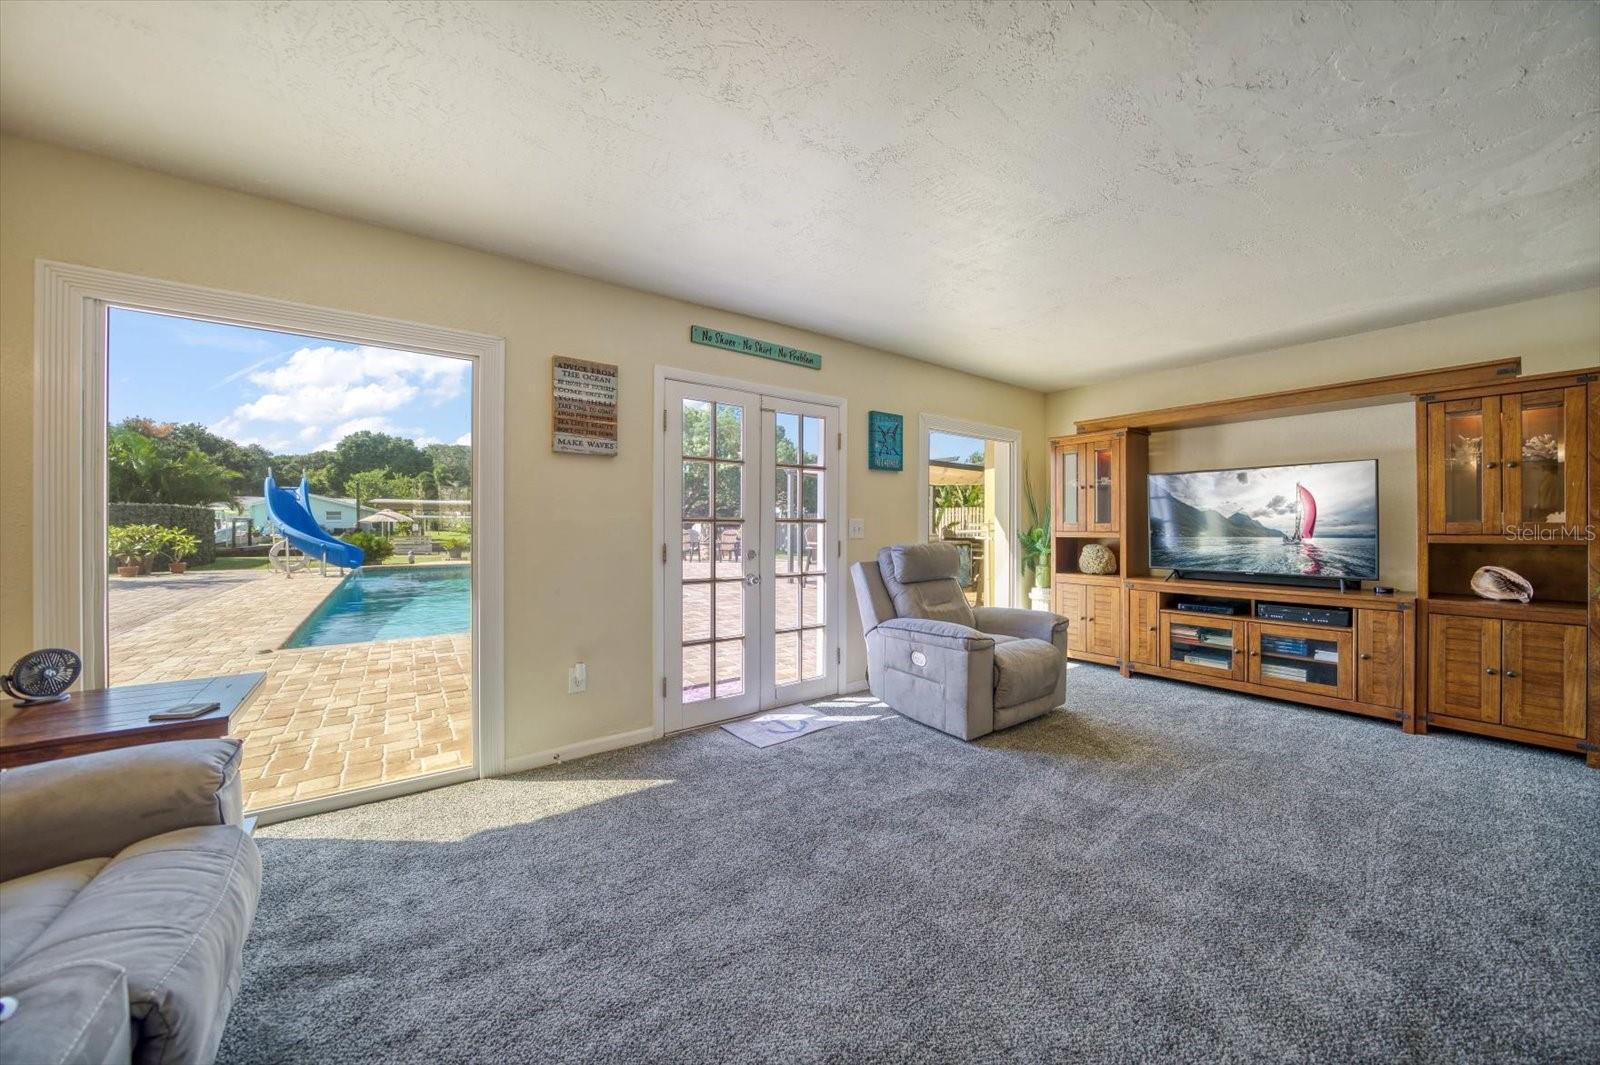 Family room with views of your park like backyard setting.